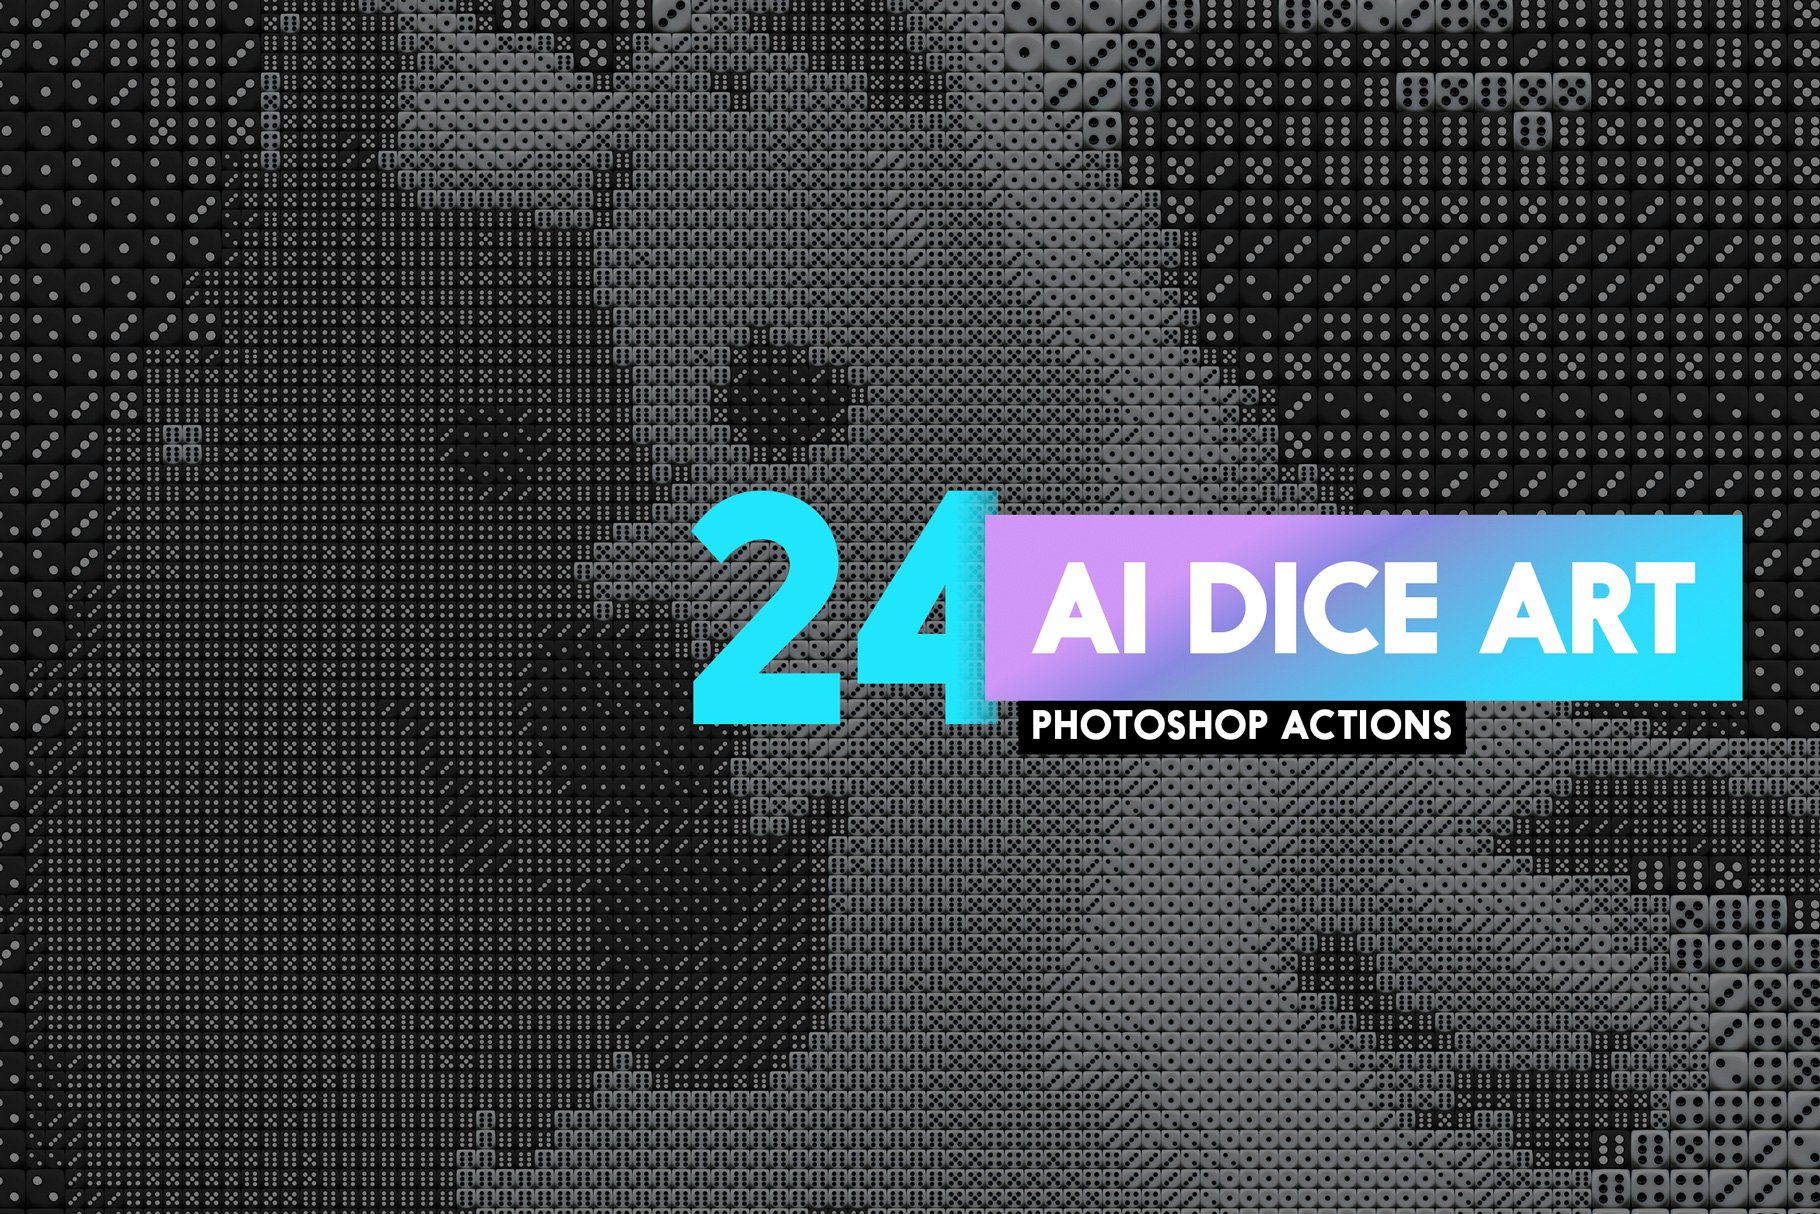 24 AI Dice Art Photoshop Actionscover image.